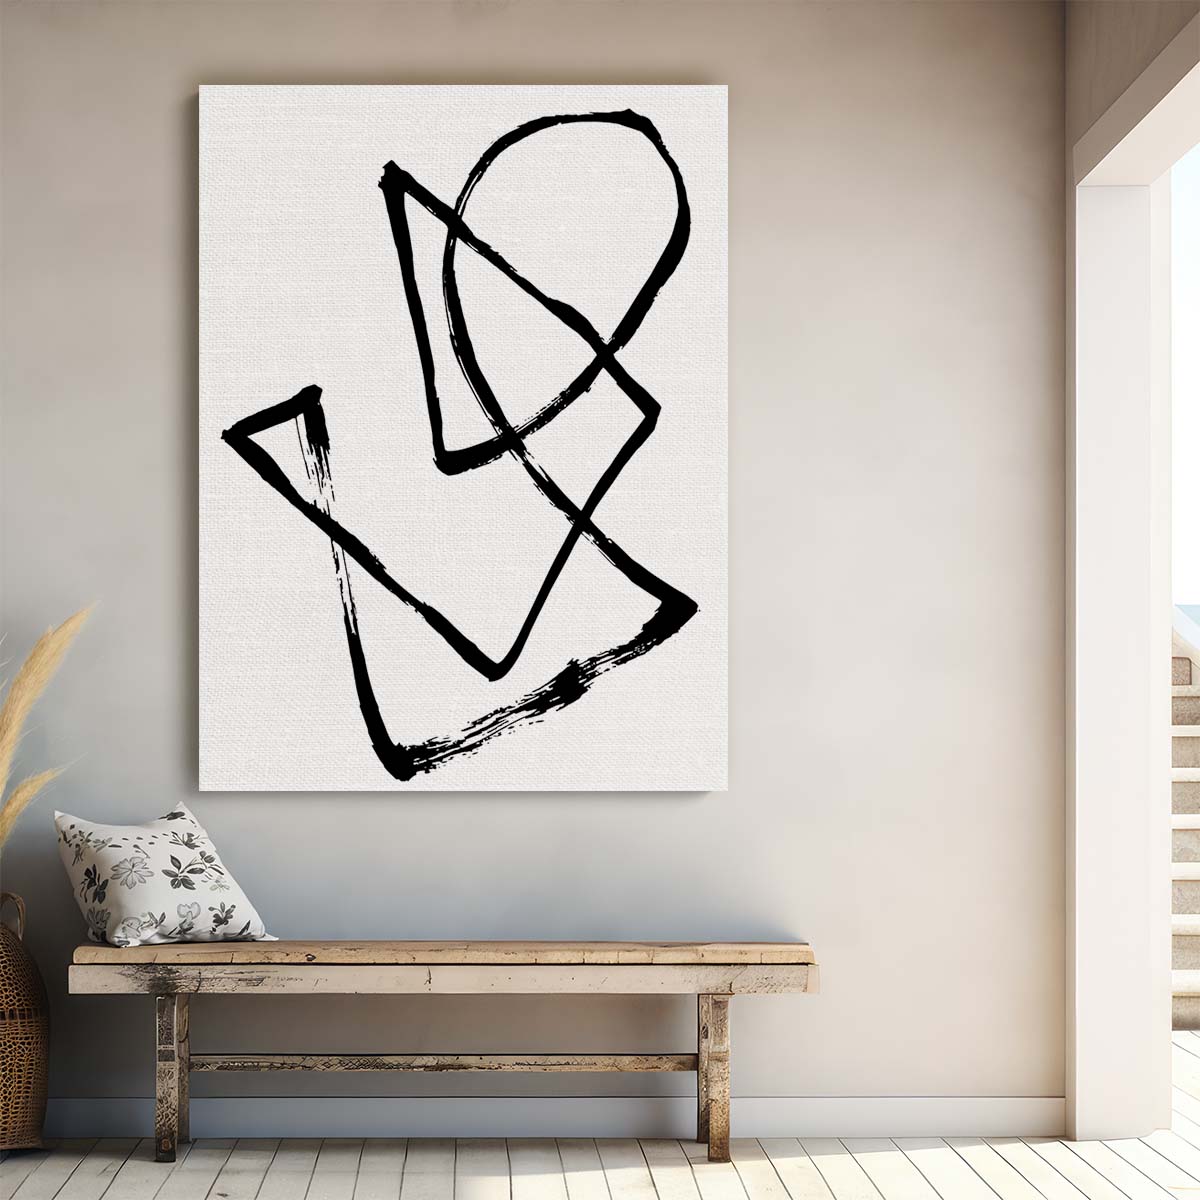 Abstract Geometric Line Art Illustration in Black and White by Luxuriance Designs, made in USA